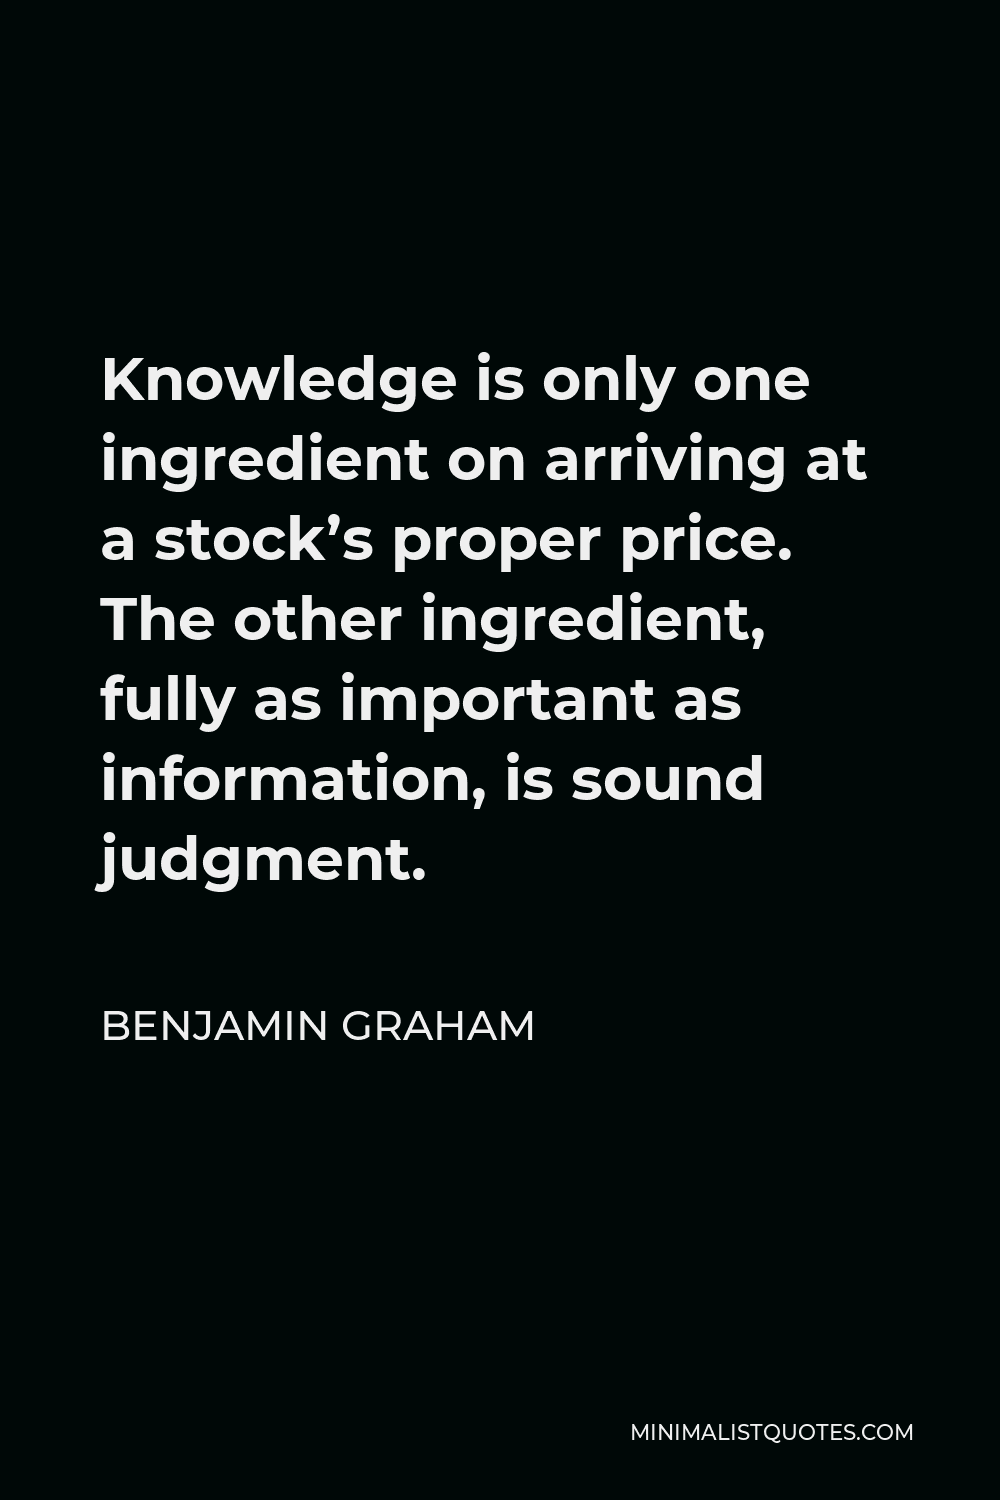 Benjamin Graham Quote - Knowledge is only one ingredient on arriving at a stock’s proper price. The other ingredient, fully as important as information, is sound judgment.